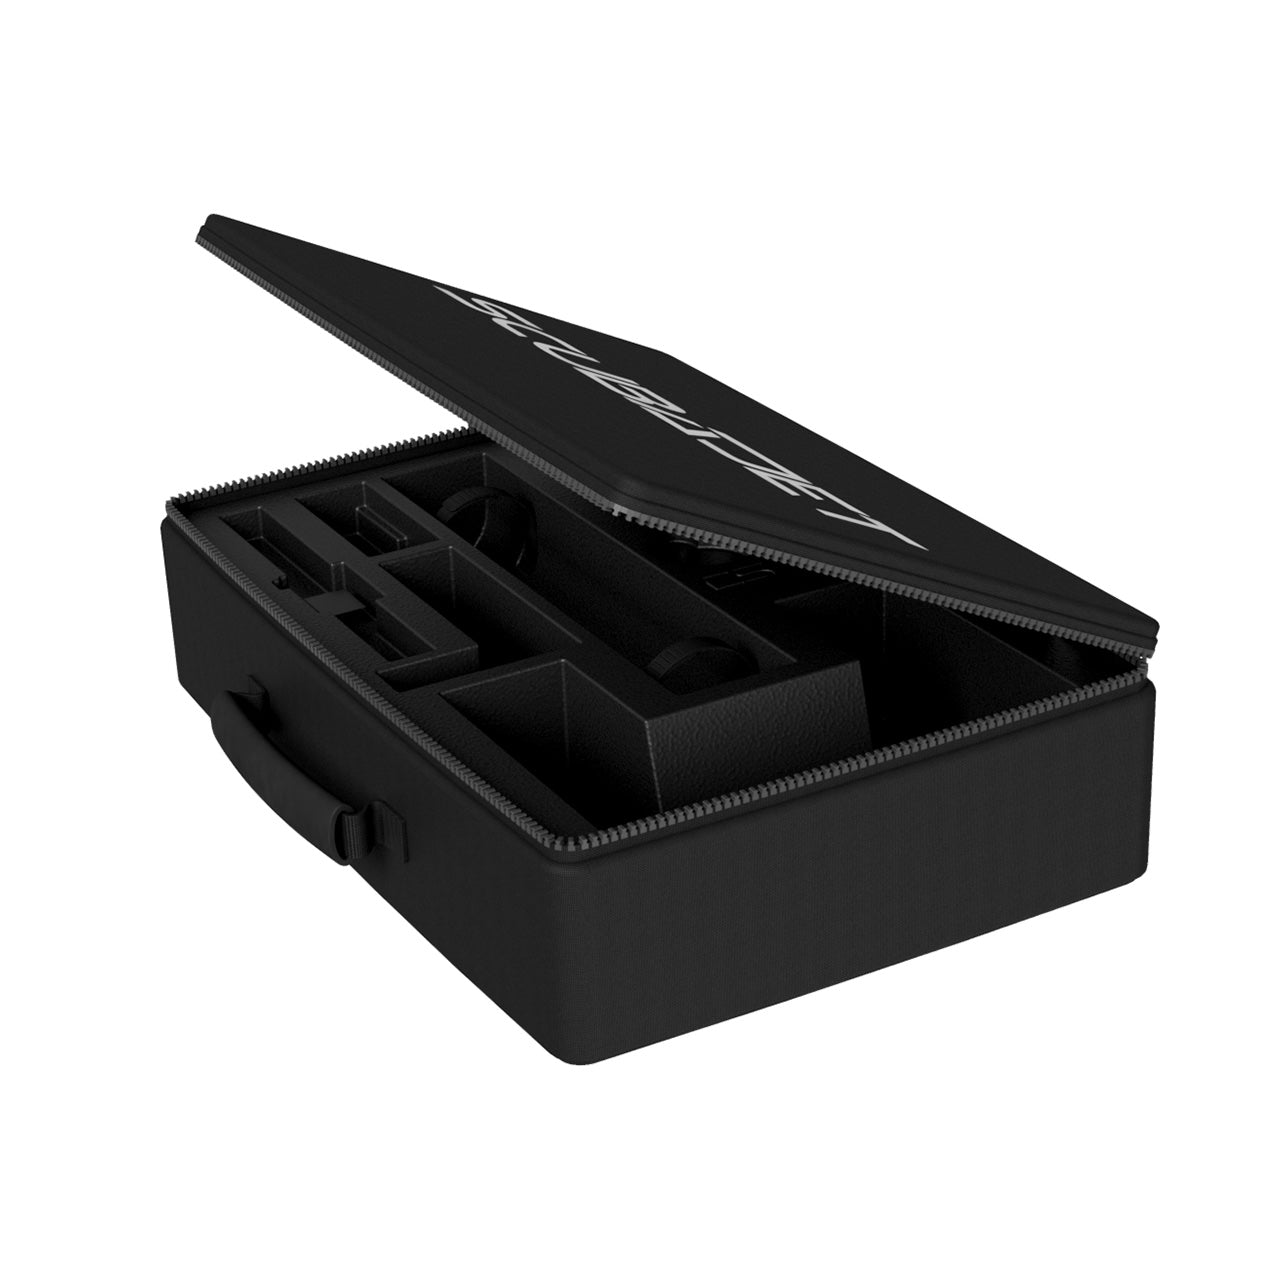 Side view ScubaJet Pro Case. All black with white ScubaJet logo on the top. The top is open so that we can see in to see the sections of the case. Zips around the edge the seal the case shut.